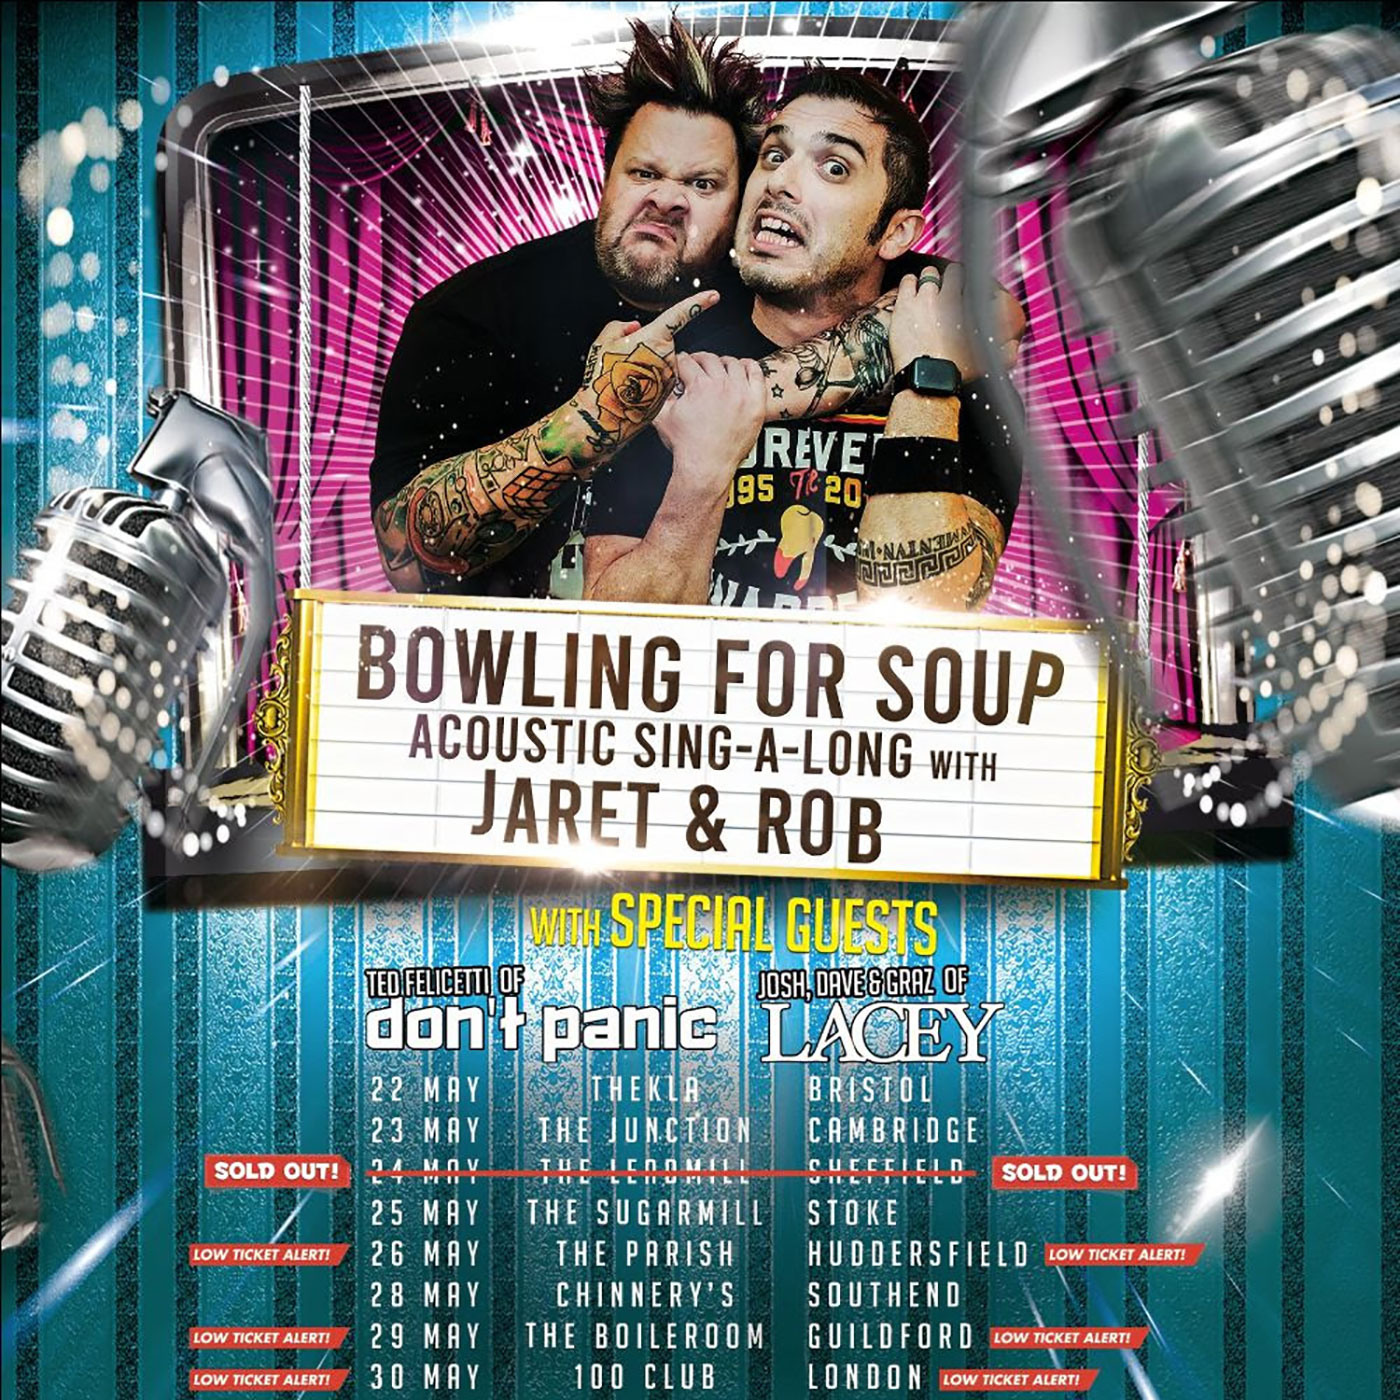 Bowling For Soup Acoustic Sing-A-Long With Jaret & Rob - May 2022 UK Tour